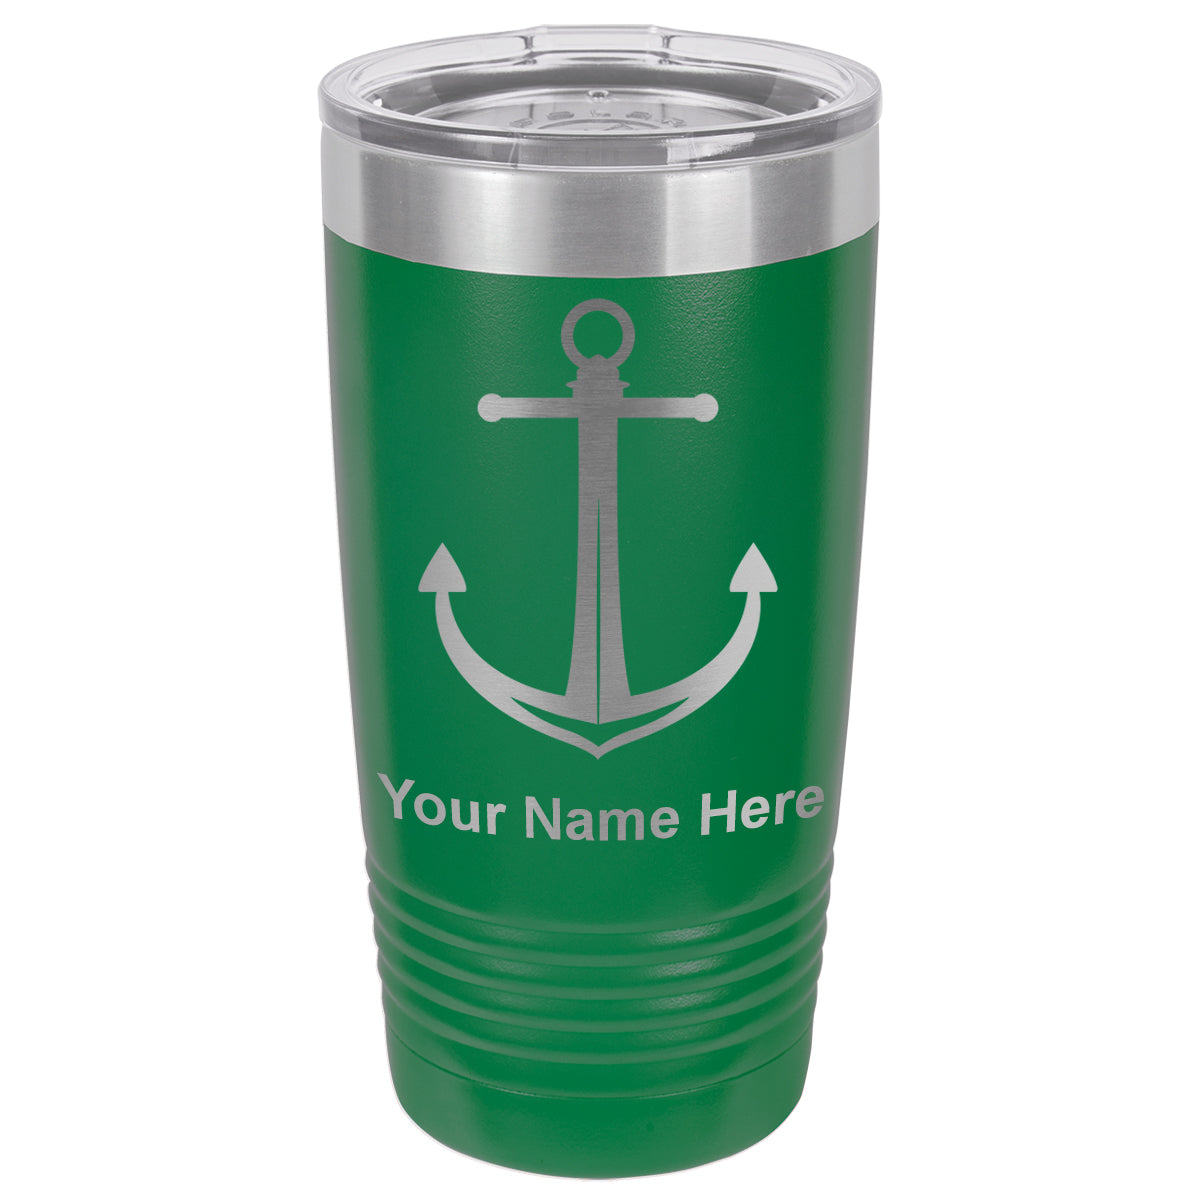 20oz Vacuum Insulated Tumbler Mug, Boat Anchor, Personalized Engraving Included